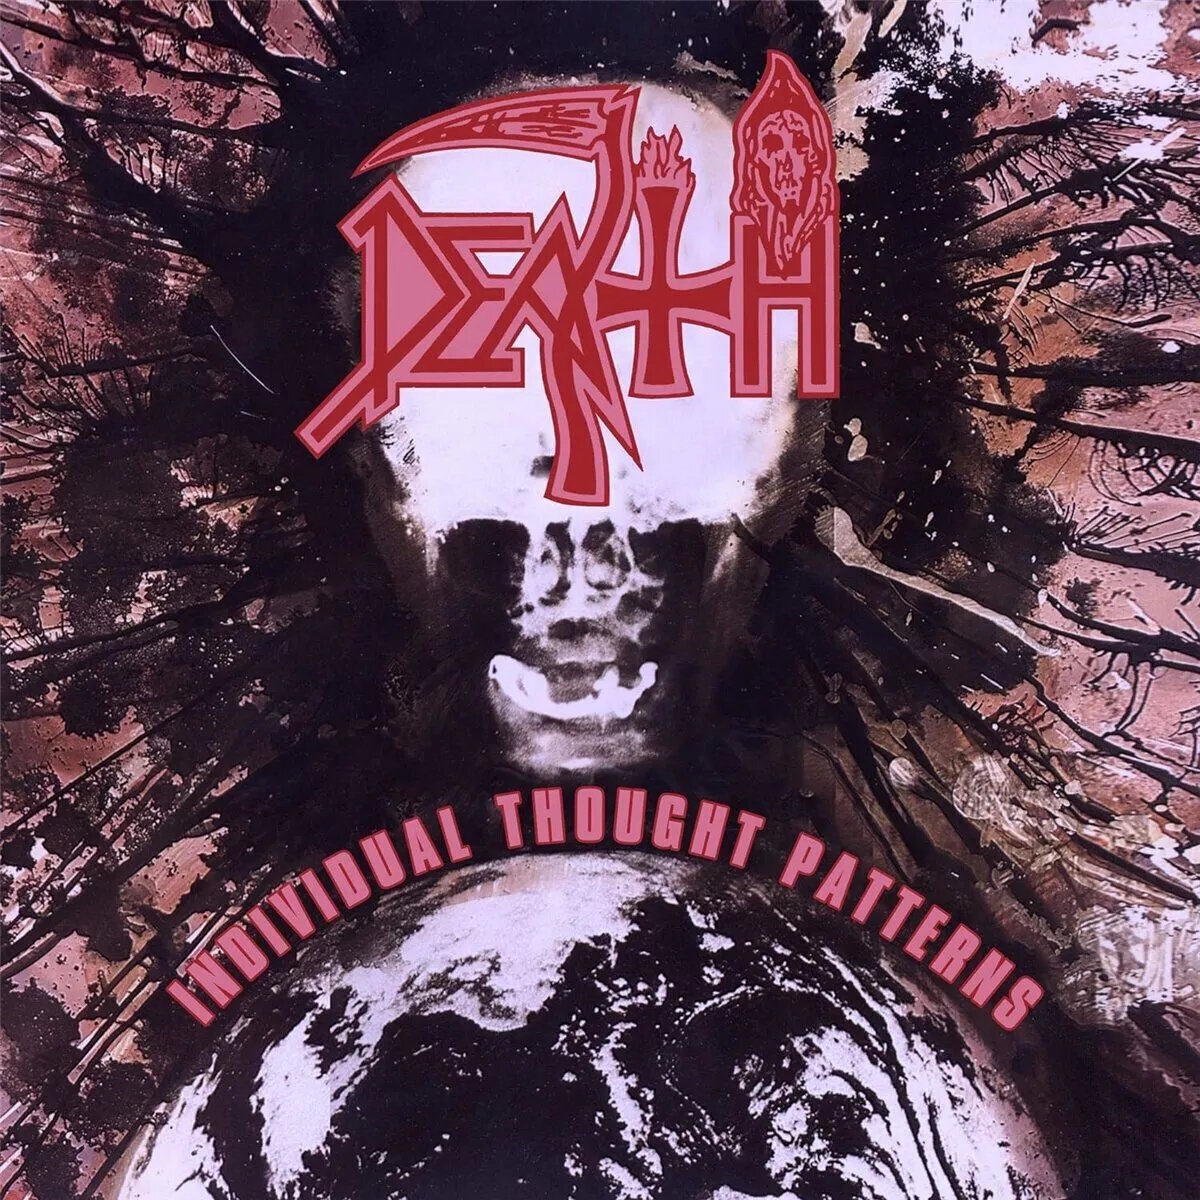 Vinyl Record Death - Individual Thought Patterns (Tri Colour Merge Splatter Coloured) (Deluxe Edition) (Limited Edition) (Reissue) (Remastered) (LP)